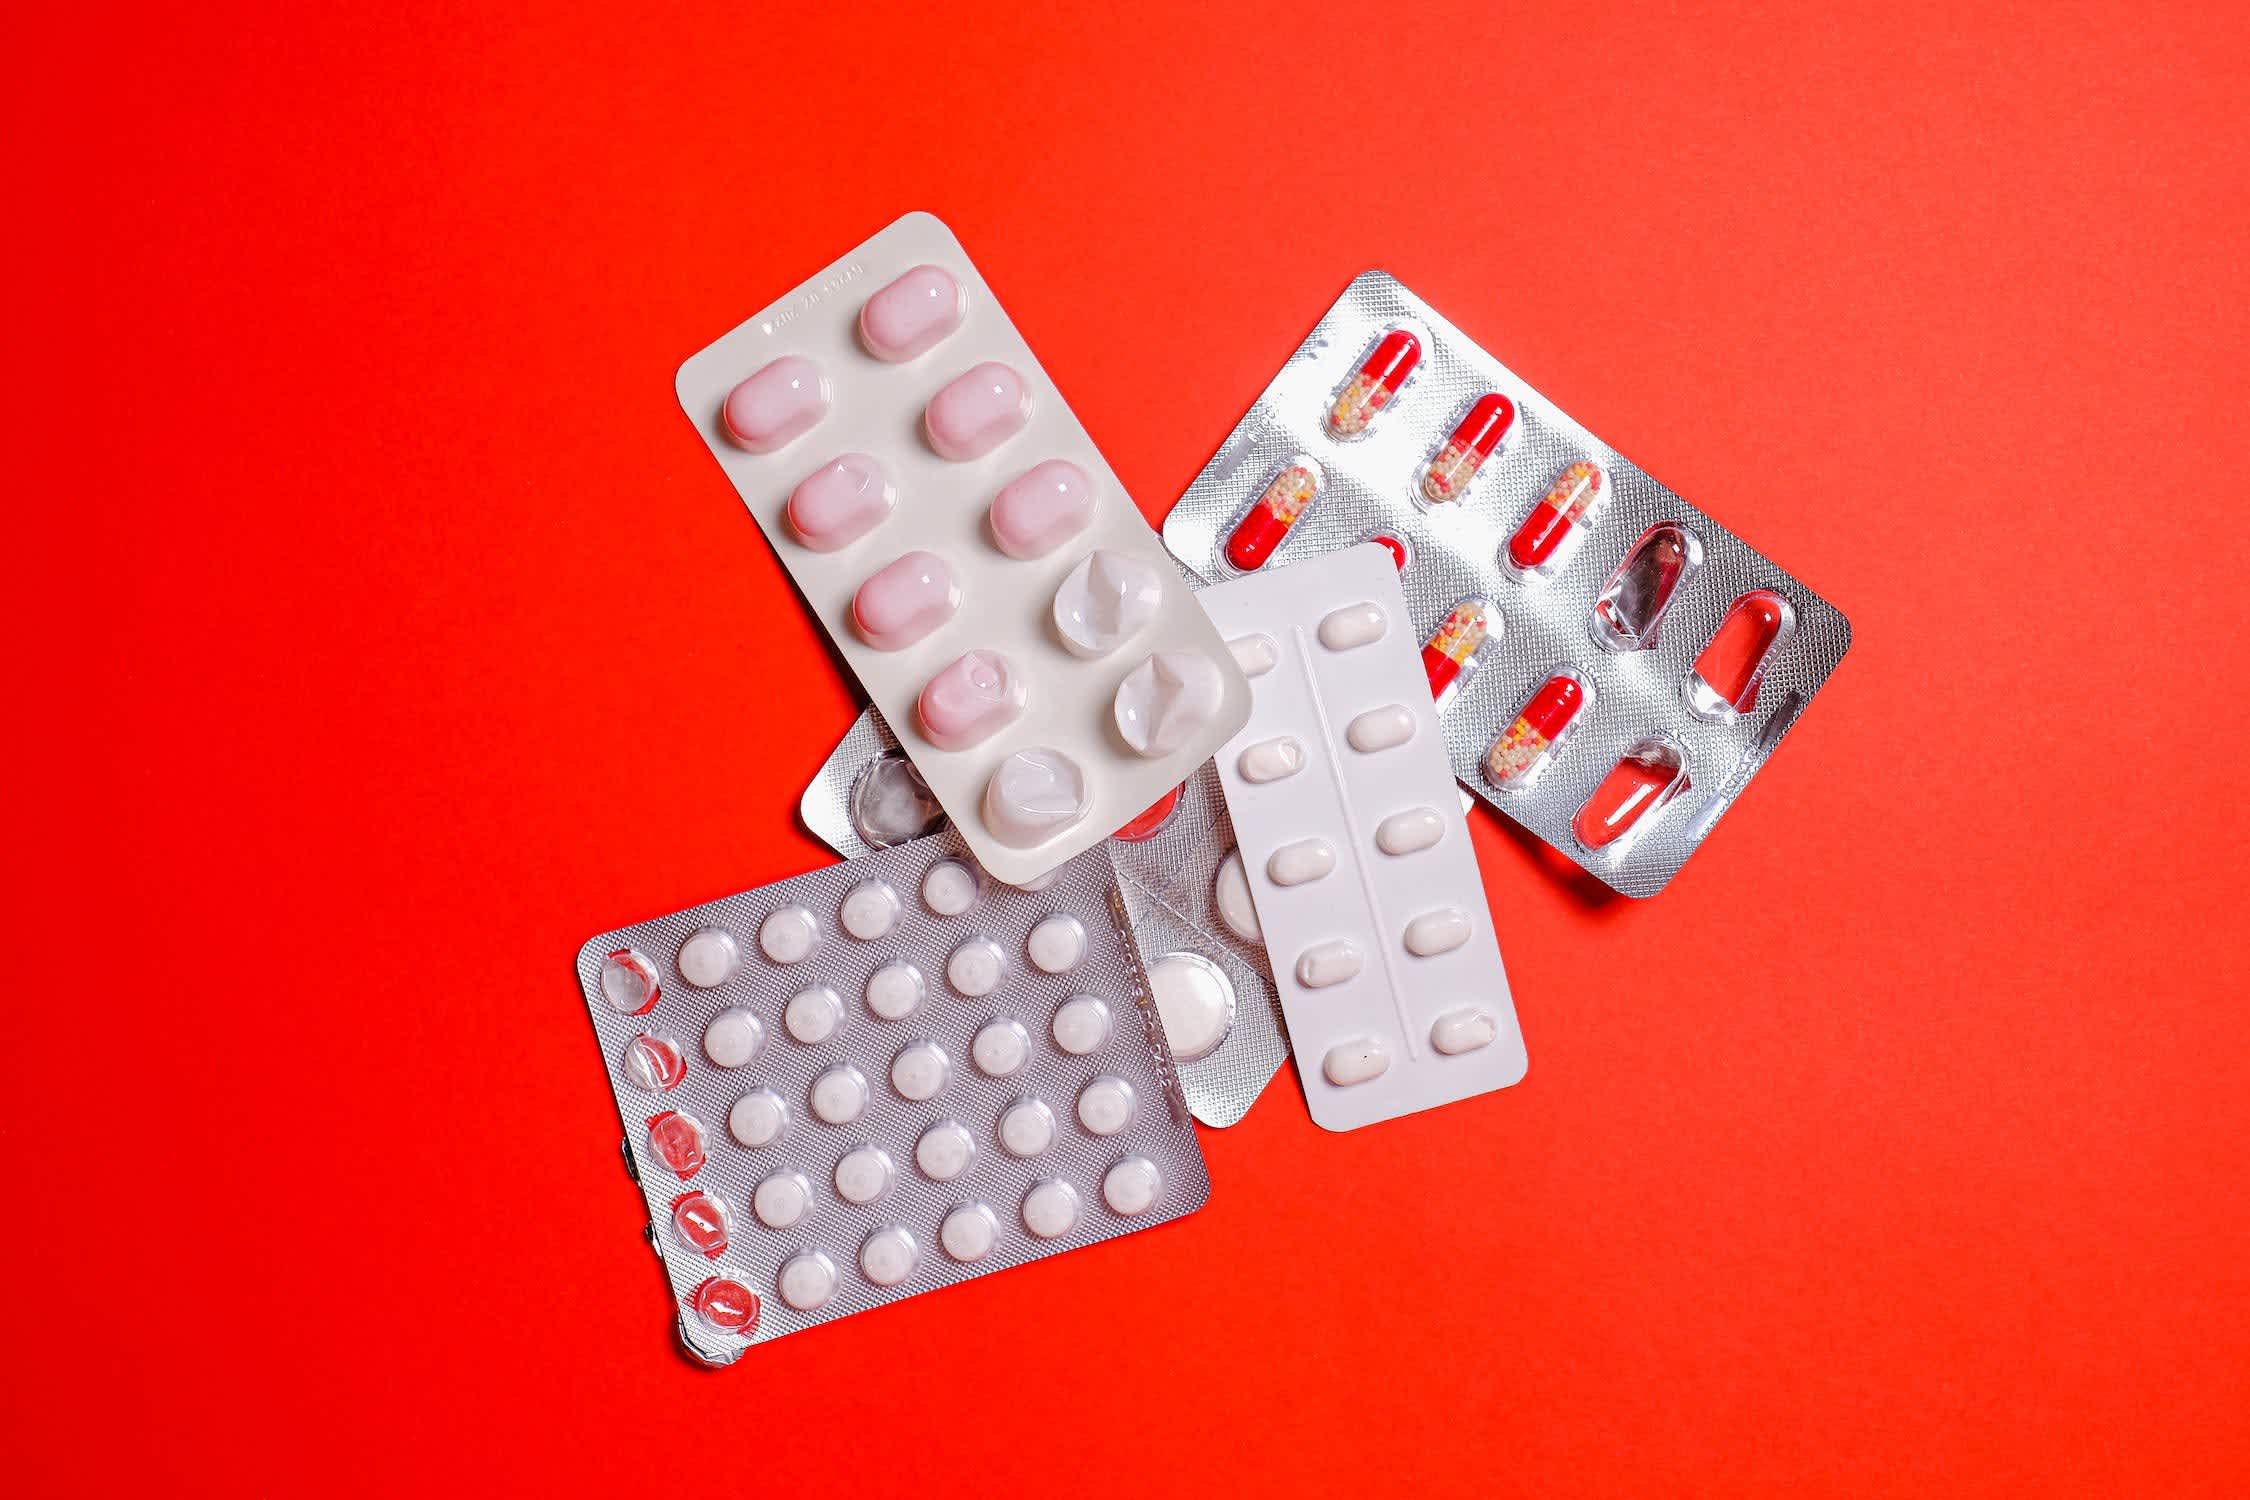 Package of medications for treating bacterial vaginosis (BV) against a red background